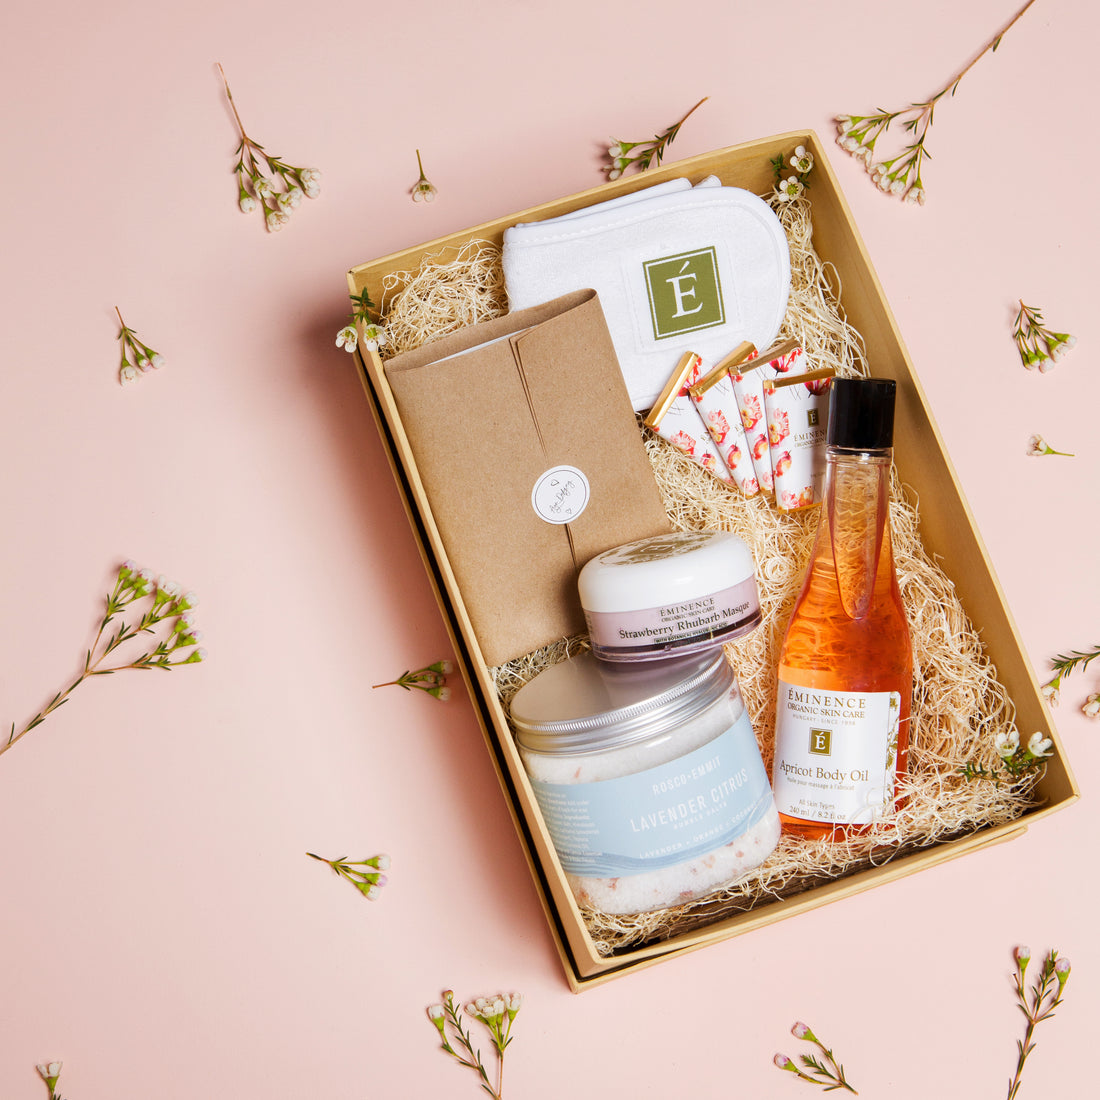 The Facial Room Spa In A Box